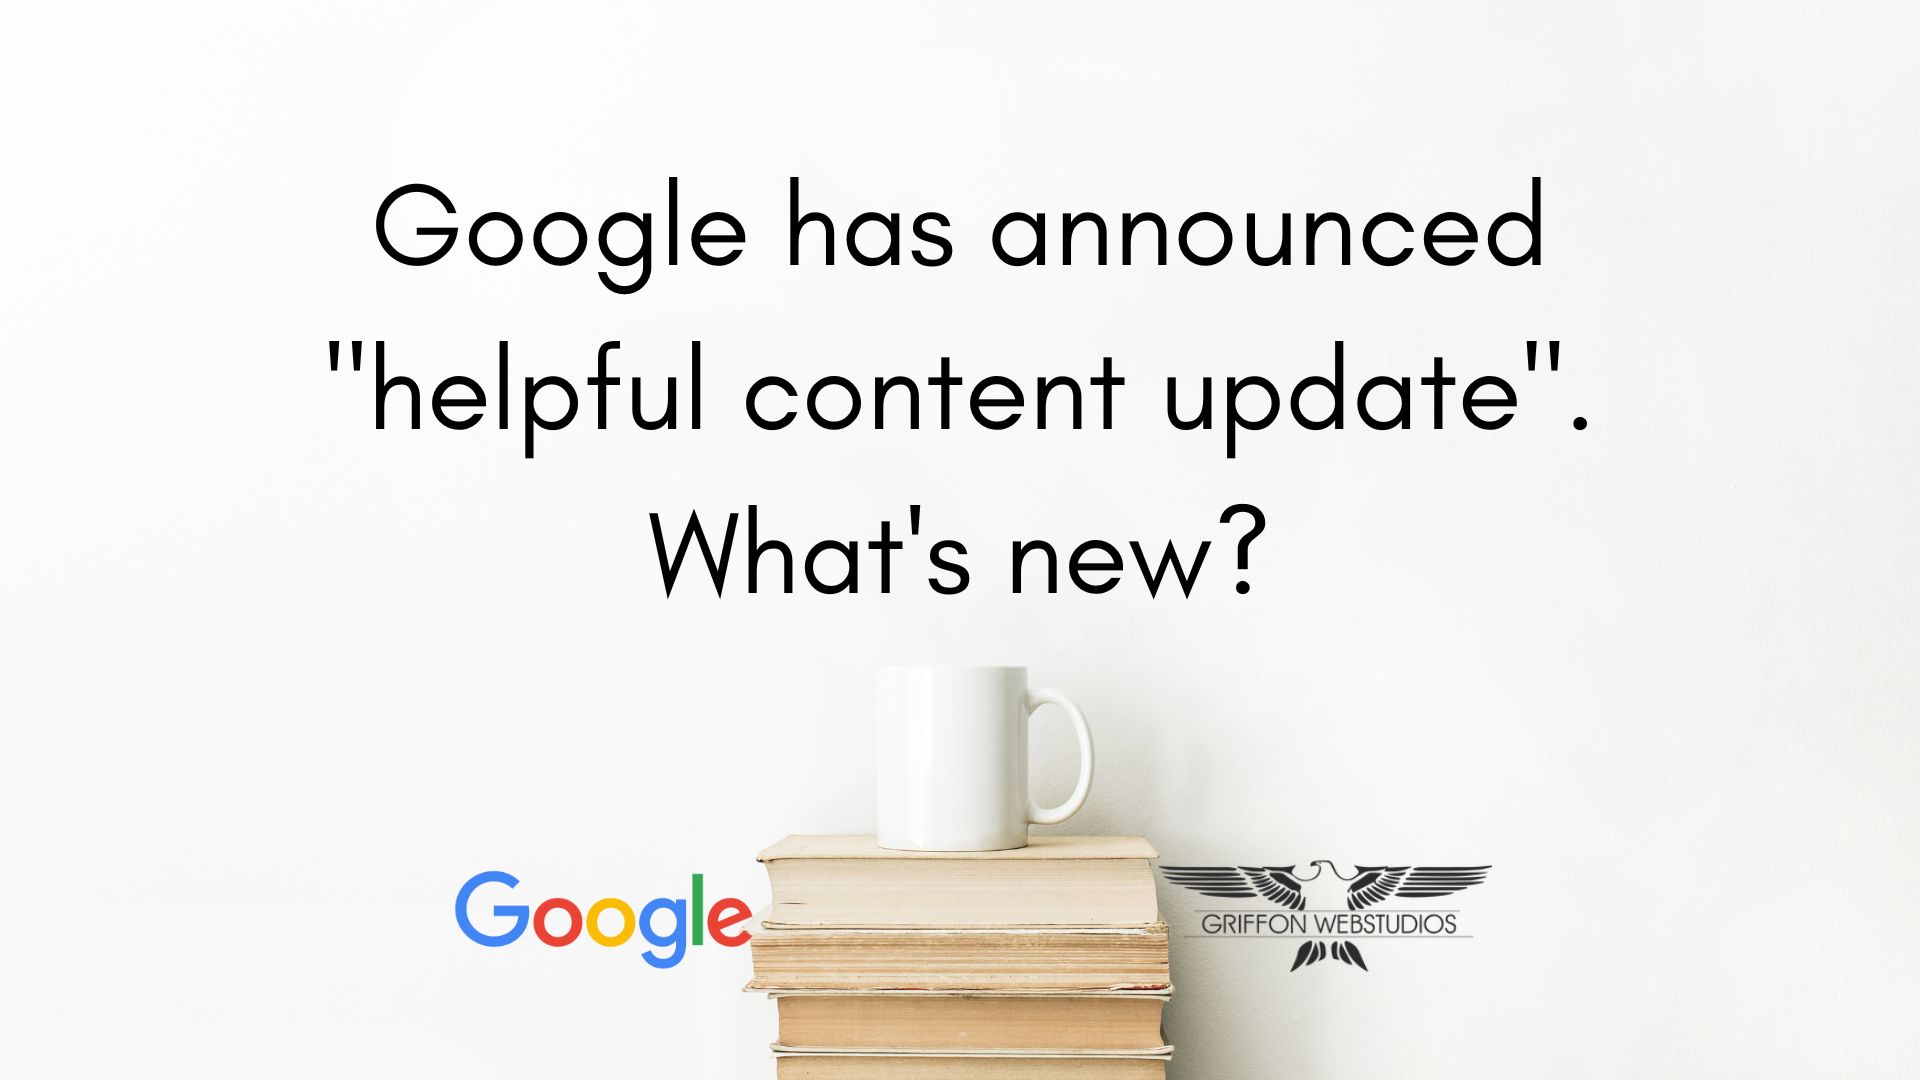 Google has announced helpful content update. What's new?